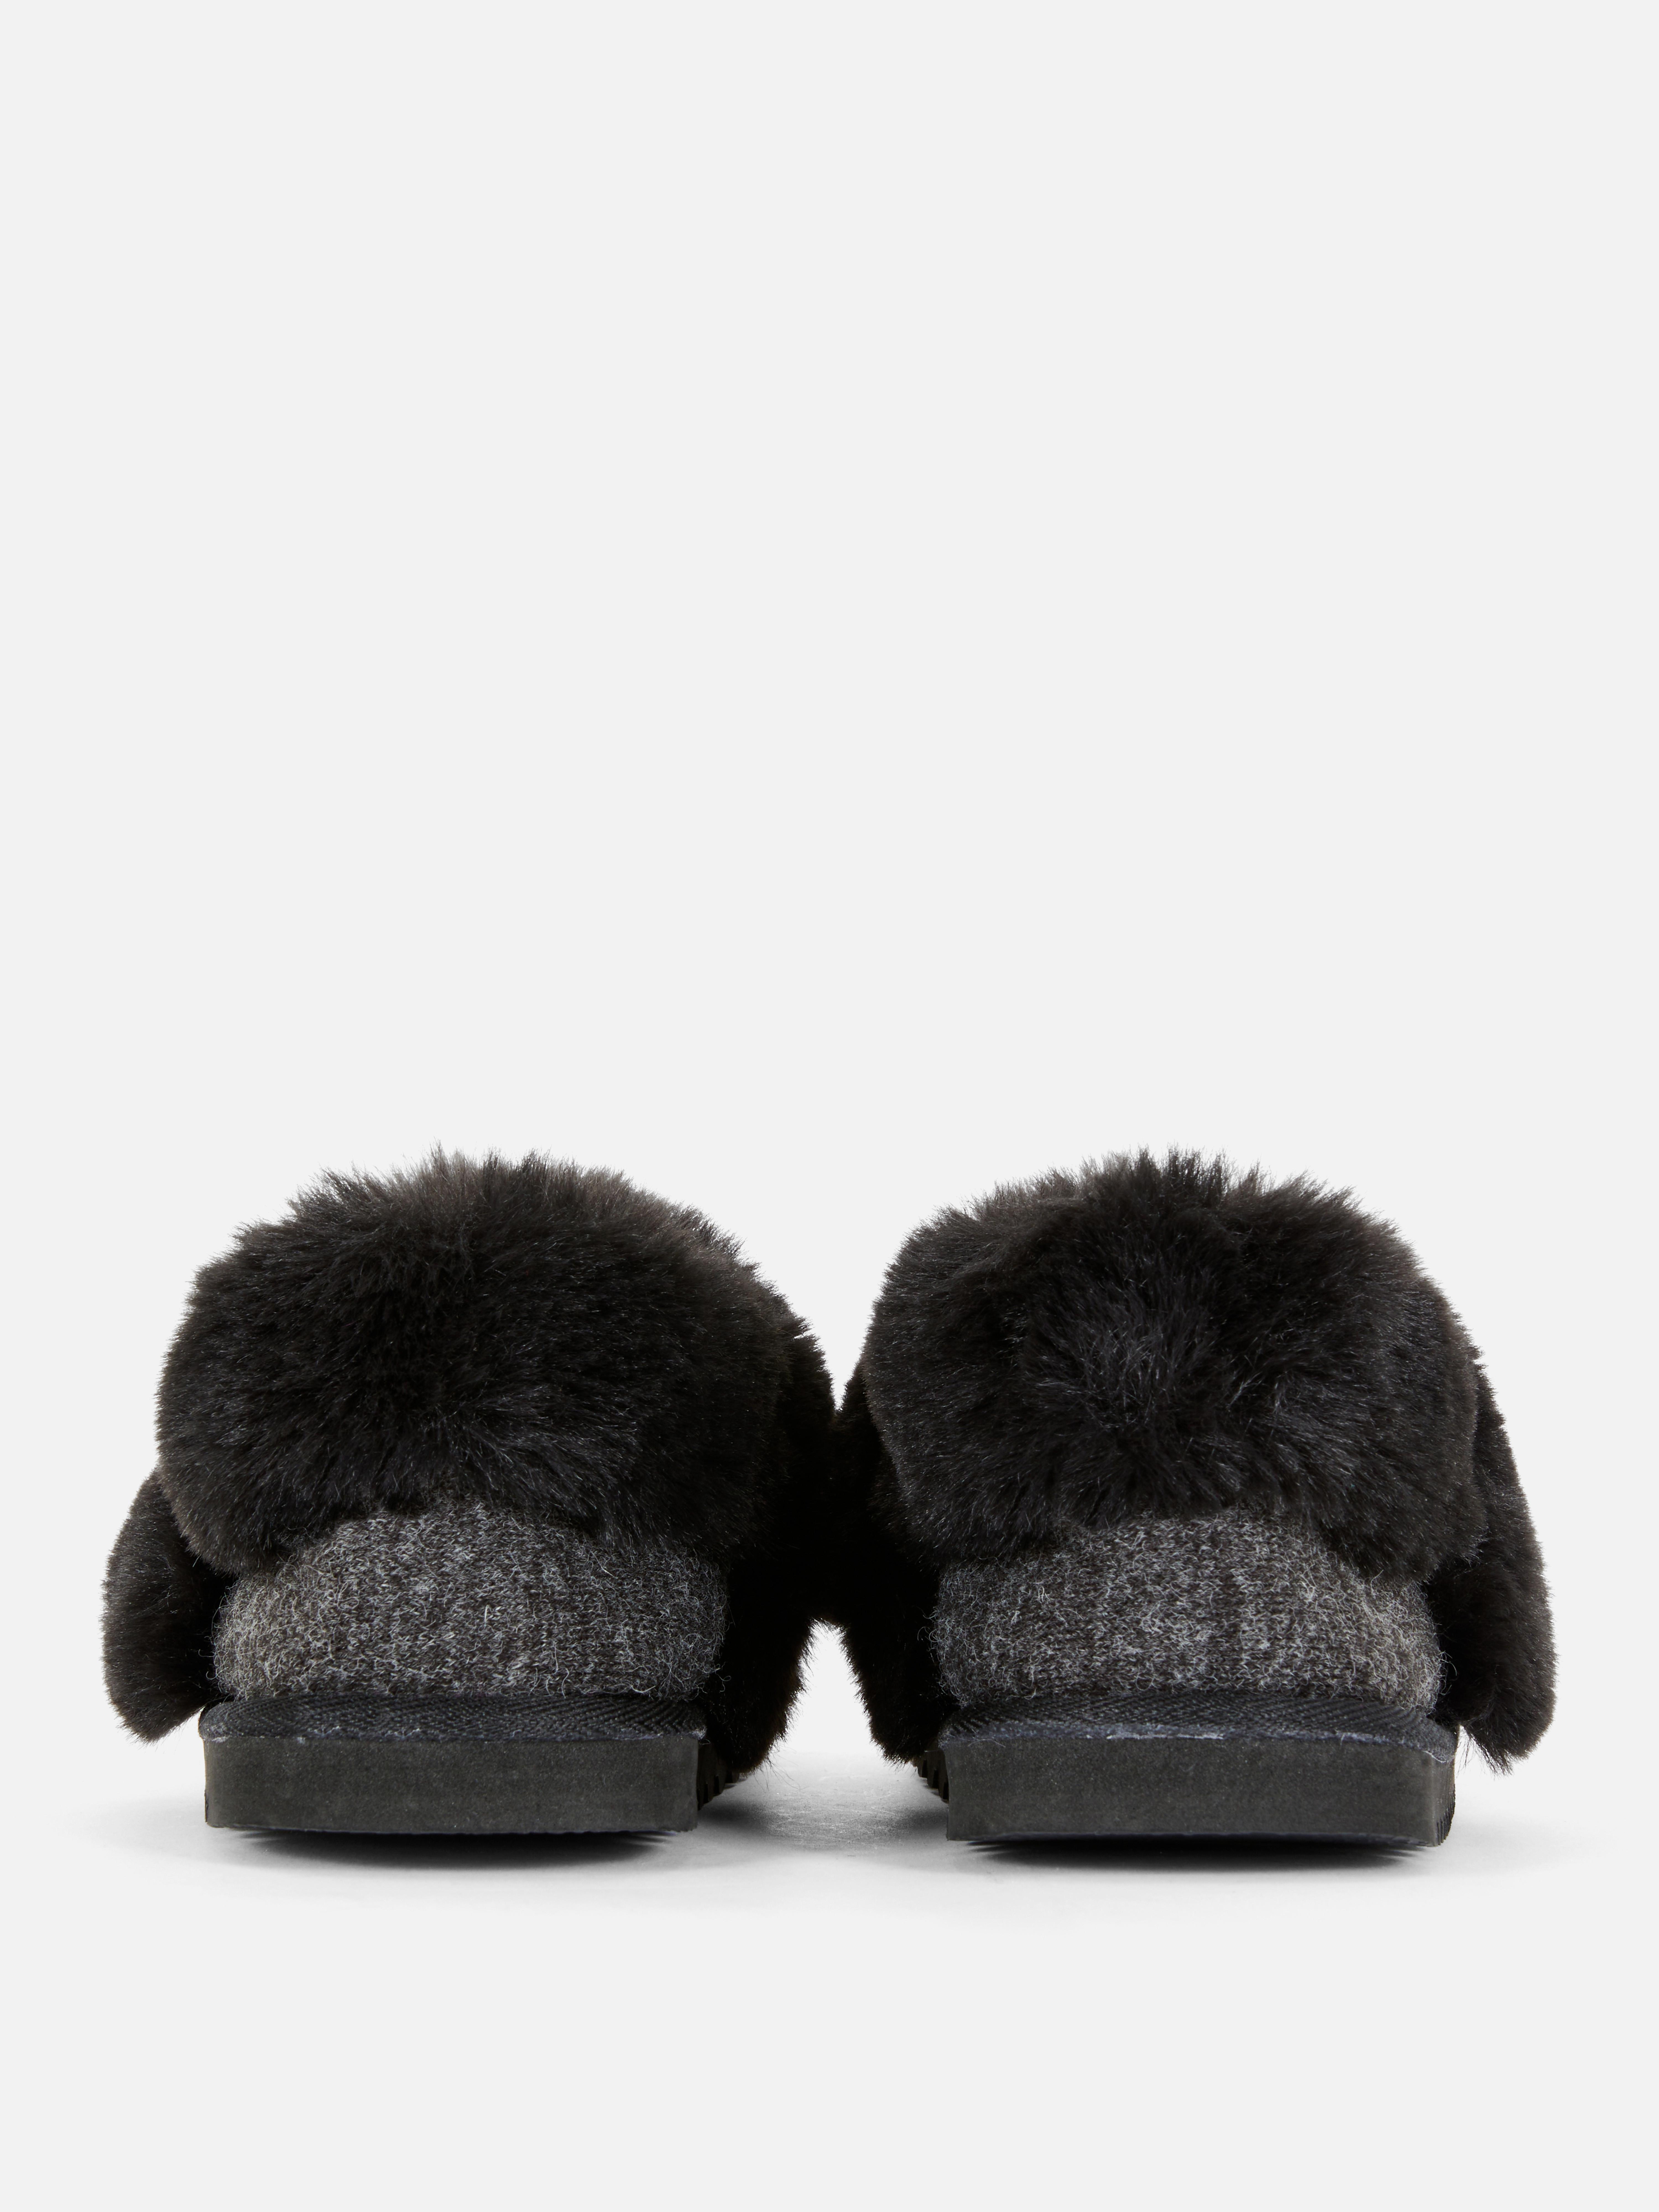 Faux Fur Moccasin Style Slippers